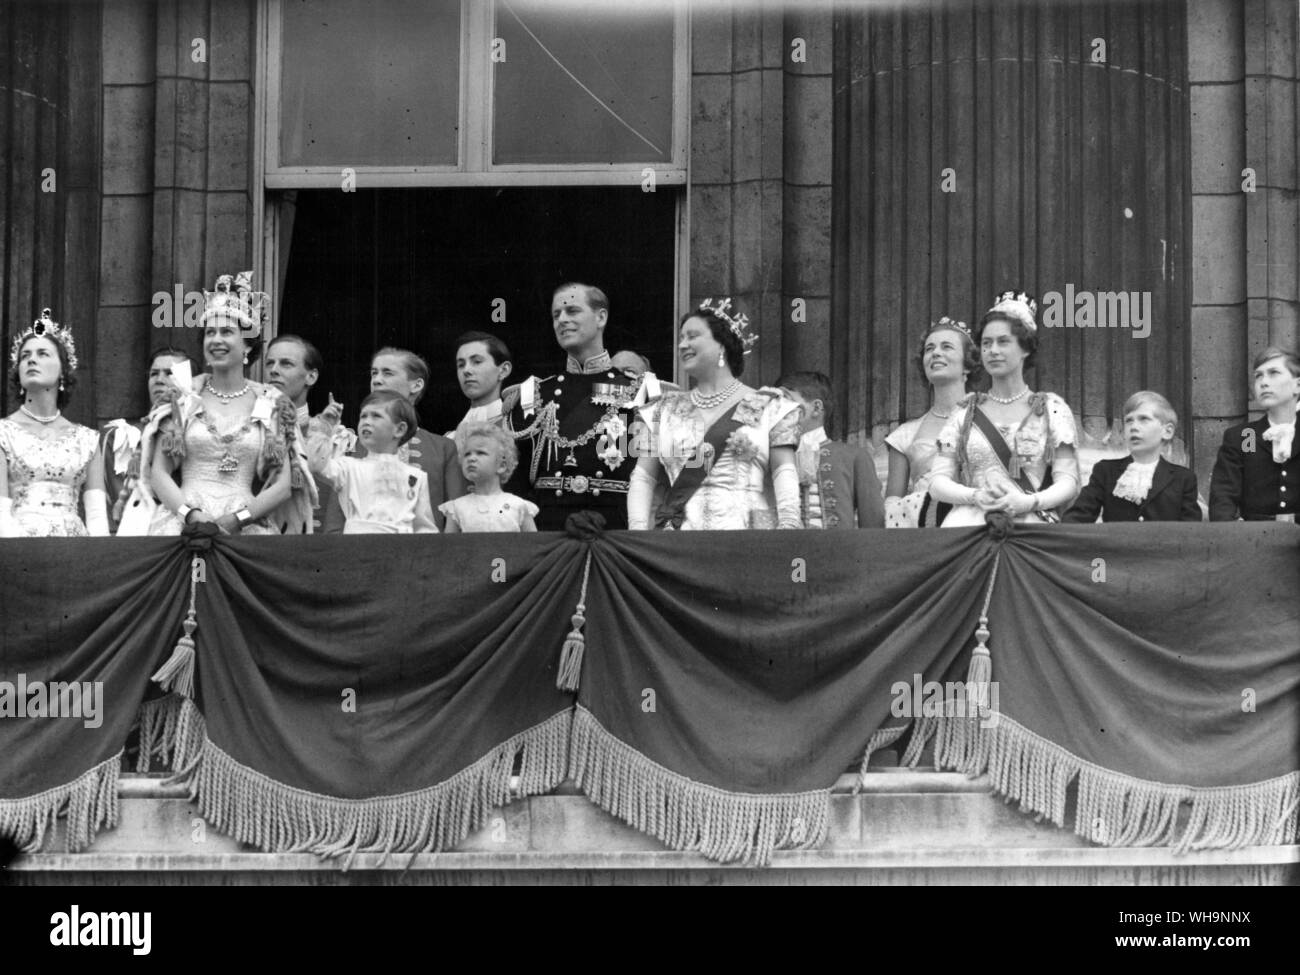 2nd June 1953|: The Queen Elizabeth takes the R.A.F salute on balcony at Buckingham Palace after the coronation. With the Royal Family. Stock Photo